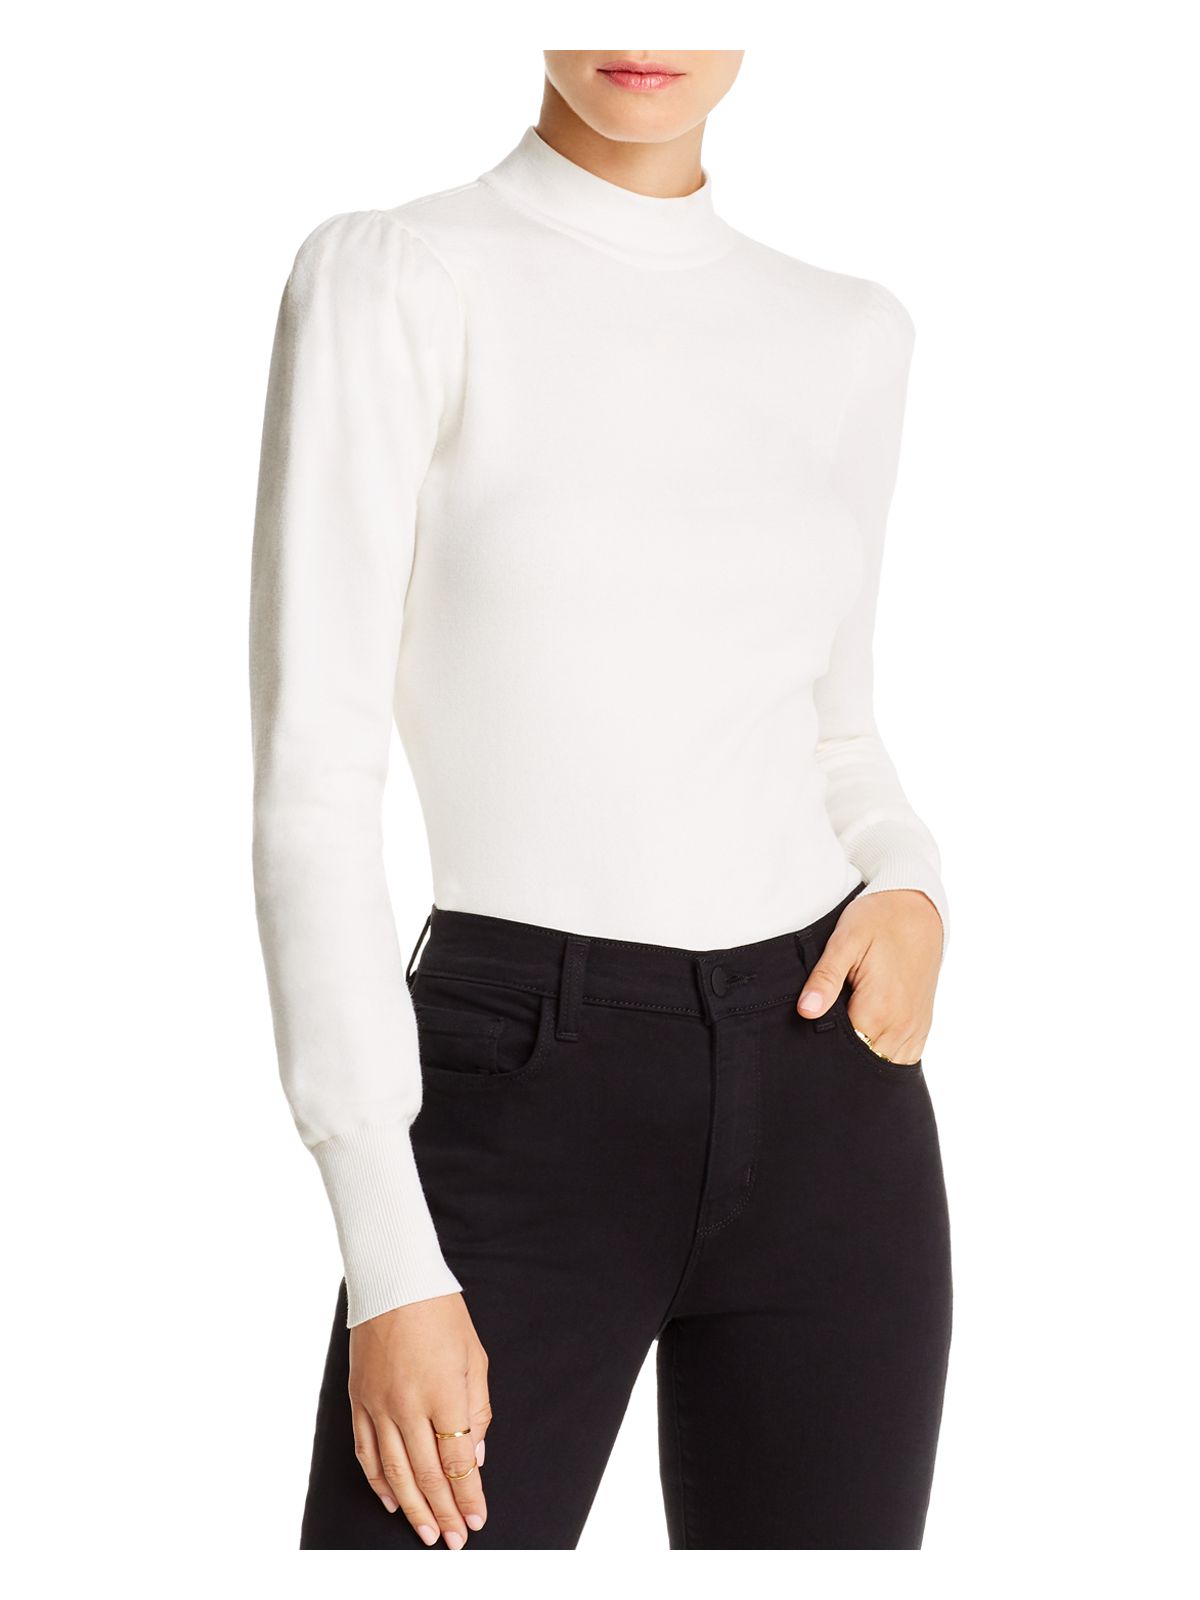 LINI Womens Ivory Pouf Turtle Neck Sweater S